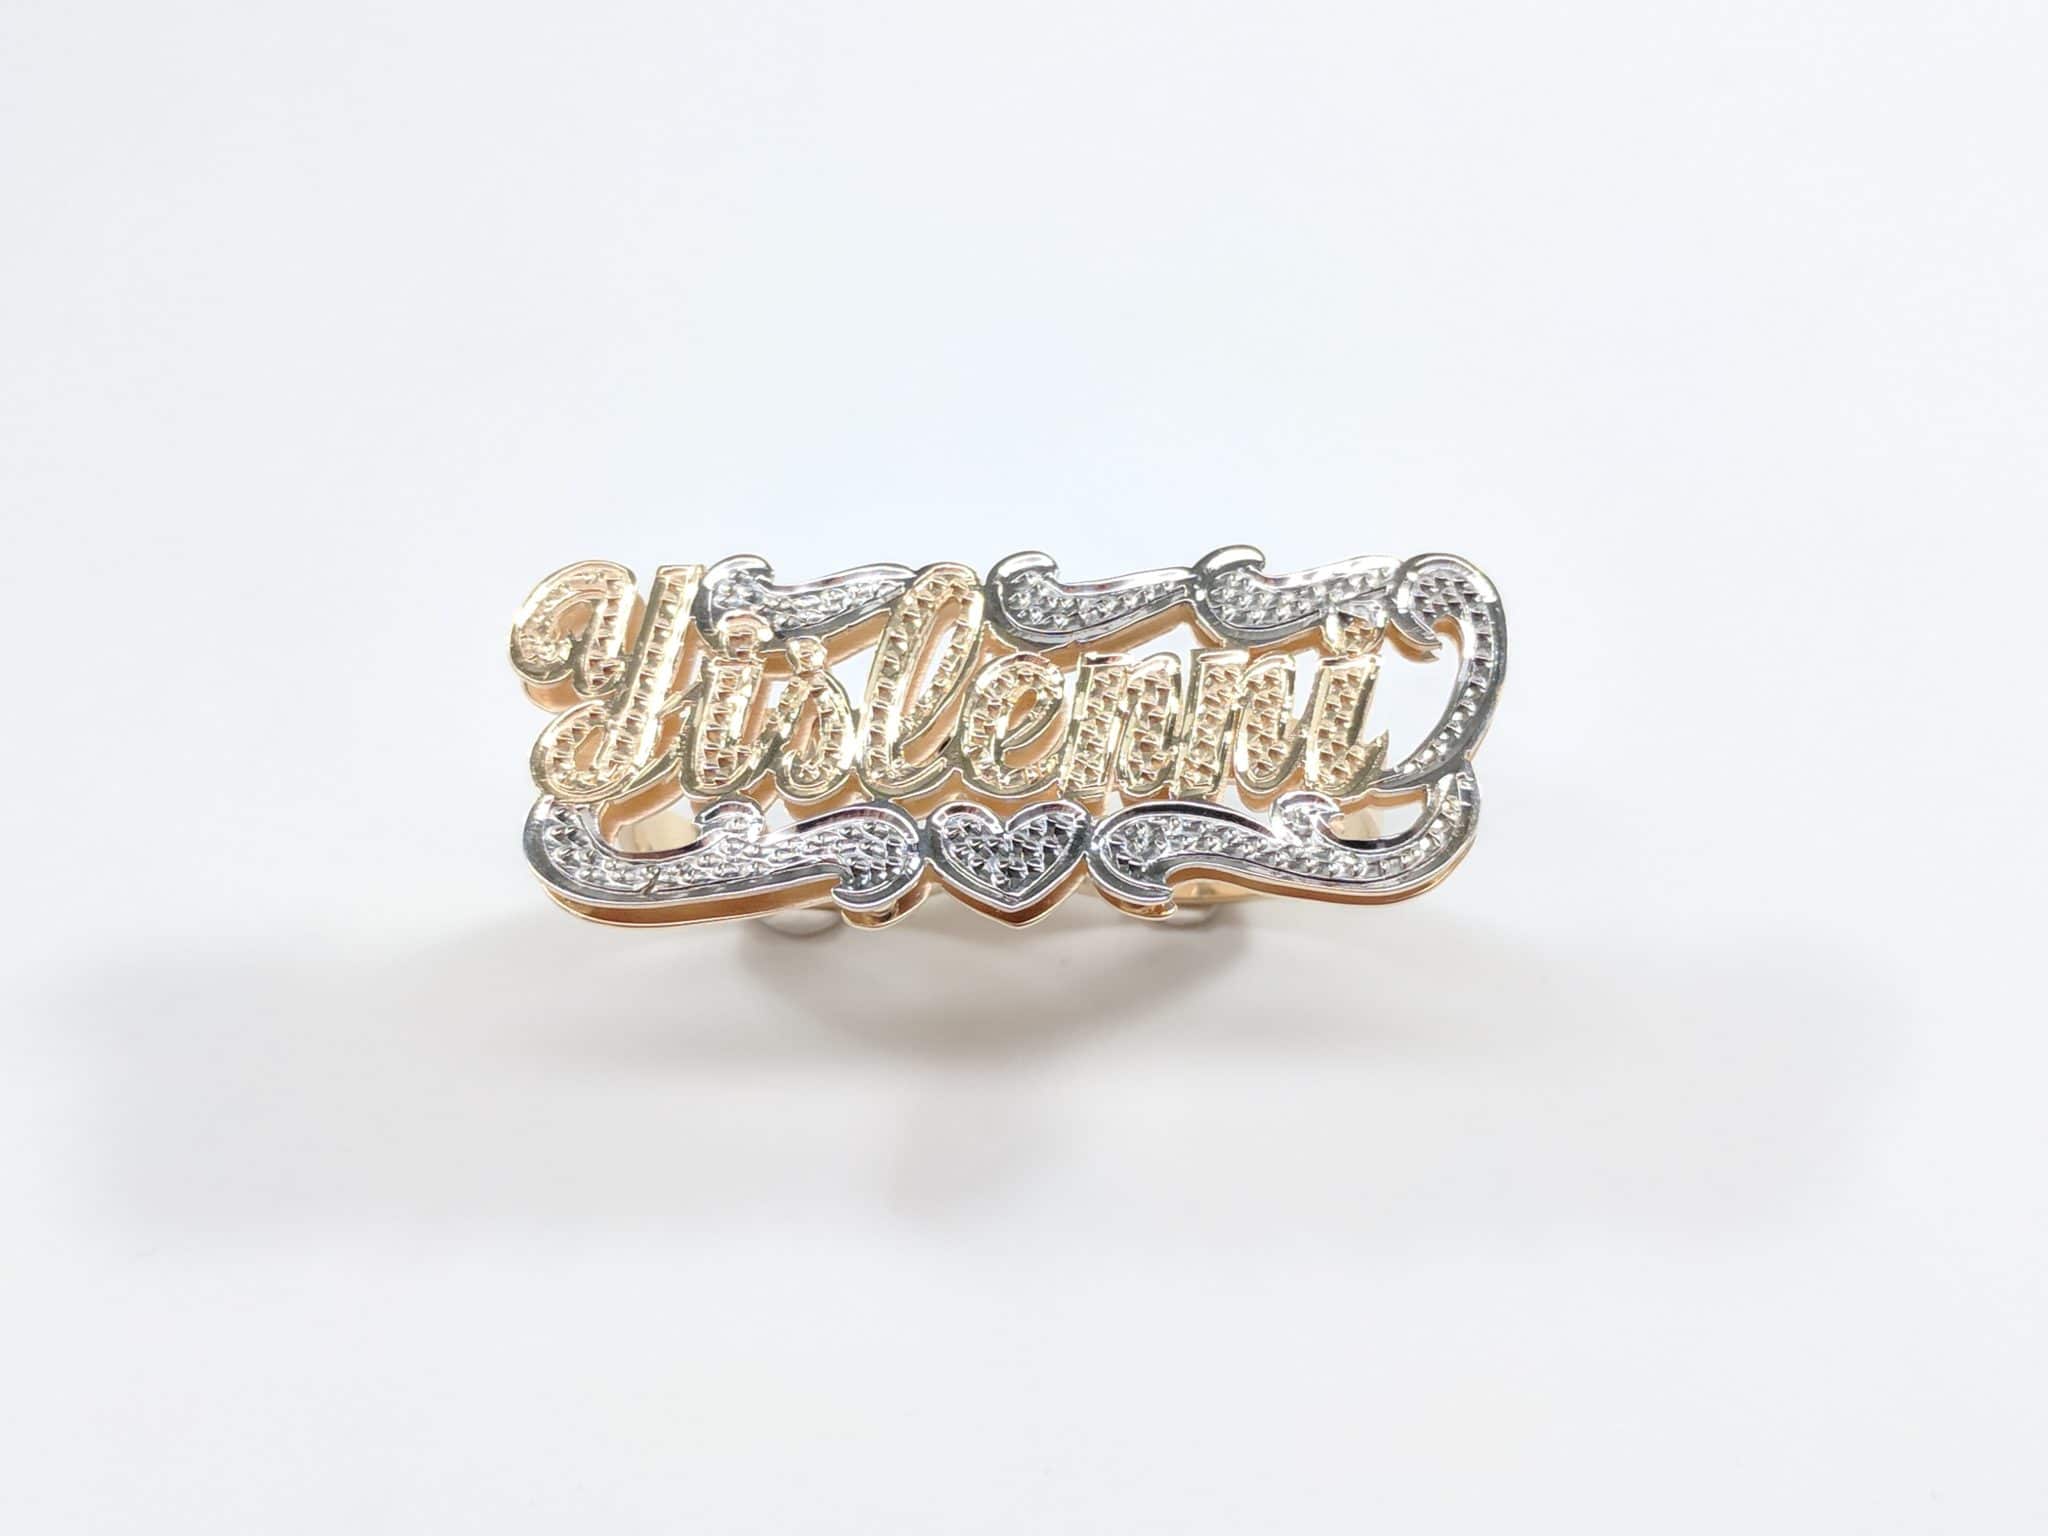 LADIES 14KT YELLOW GOLD DOUBLE FINGER NAME RING